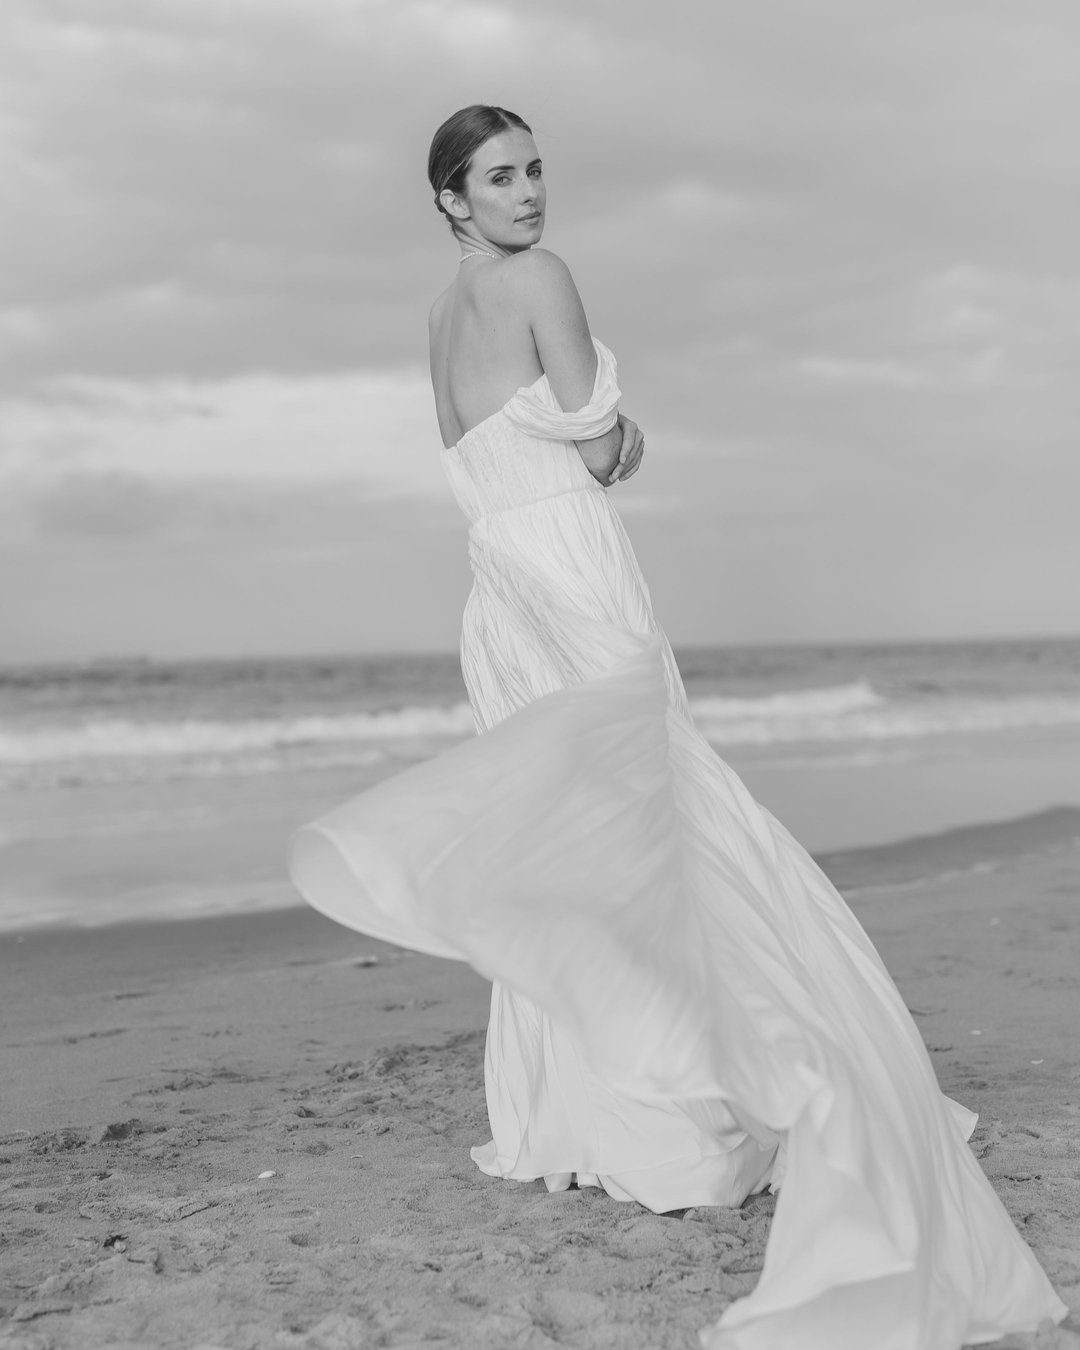 May is a great month to start your dress search. Lock in a date with your girls and come visit us in the Mount

Feat. The Noah Gown 
@jade.in.the.jungle
@_alexandra_weddings

#weddinginspriation #weddingdress #beachwedding #nzweddings #bride #2025bri